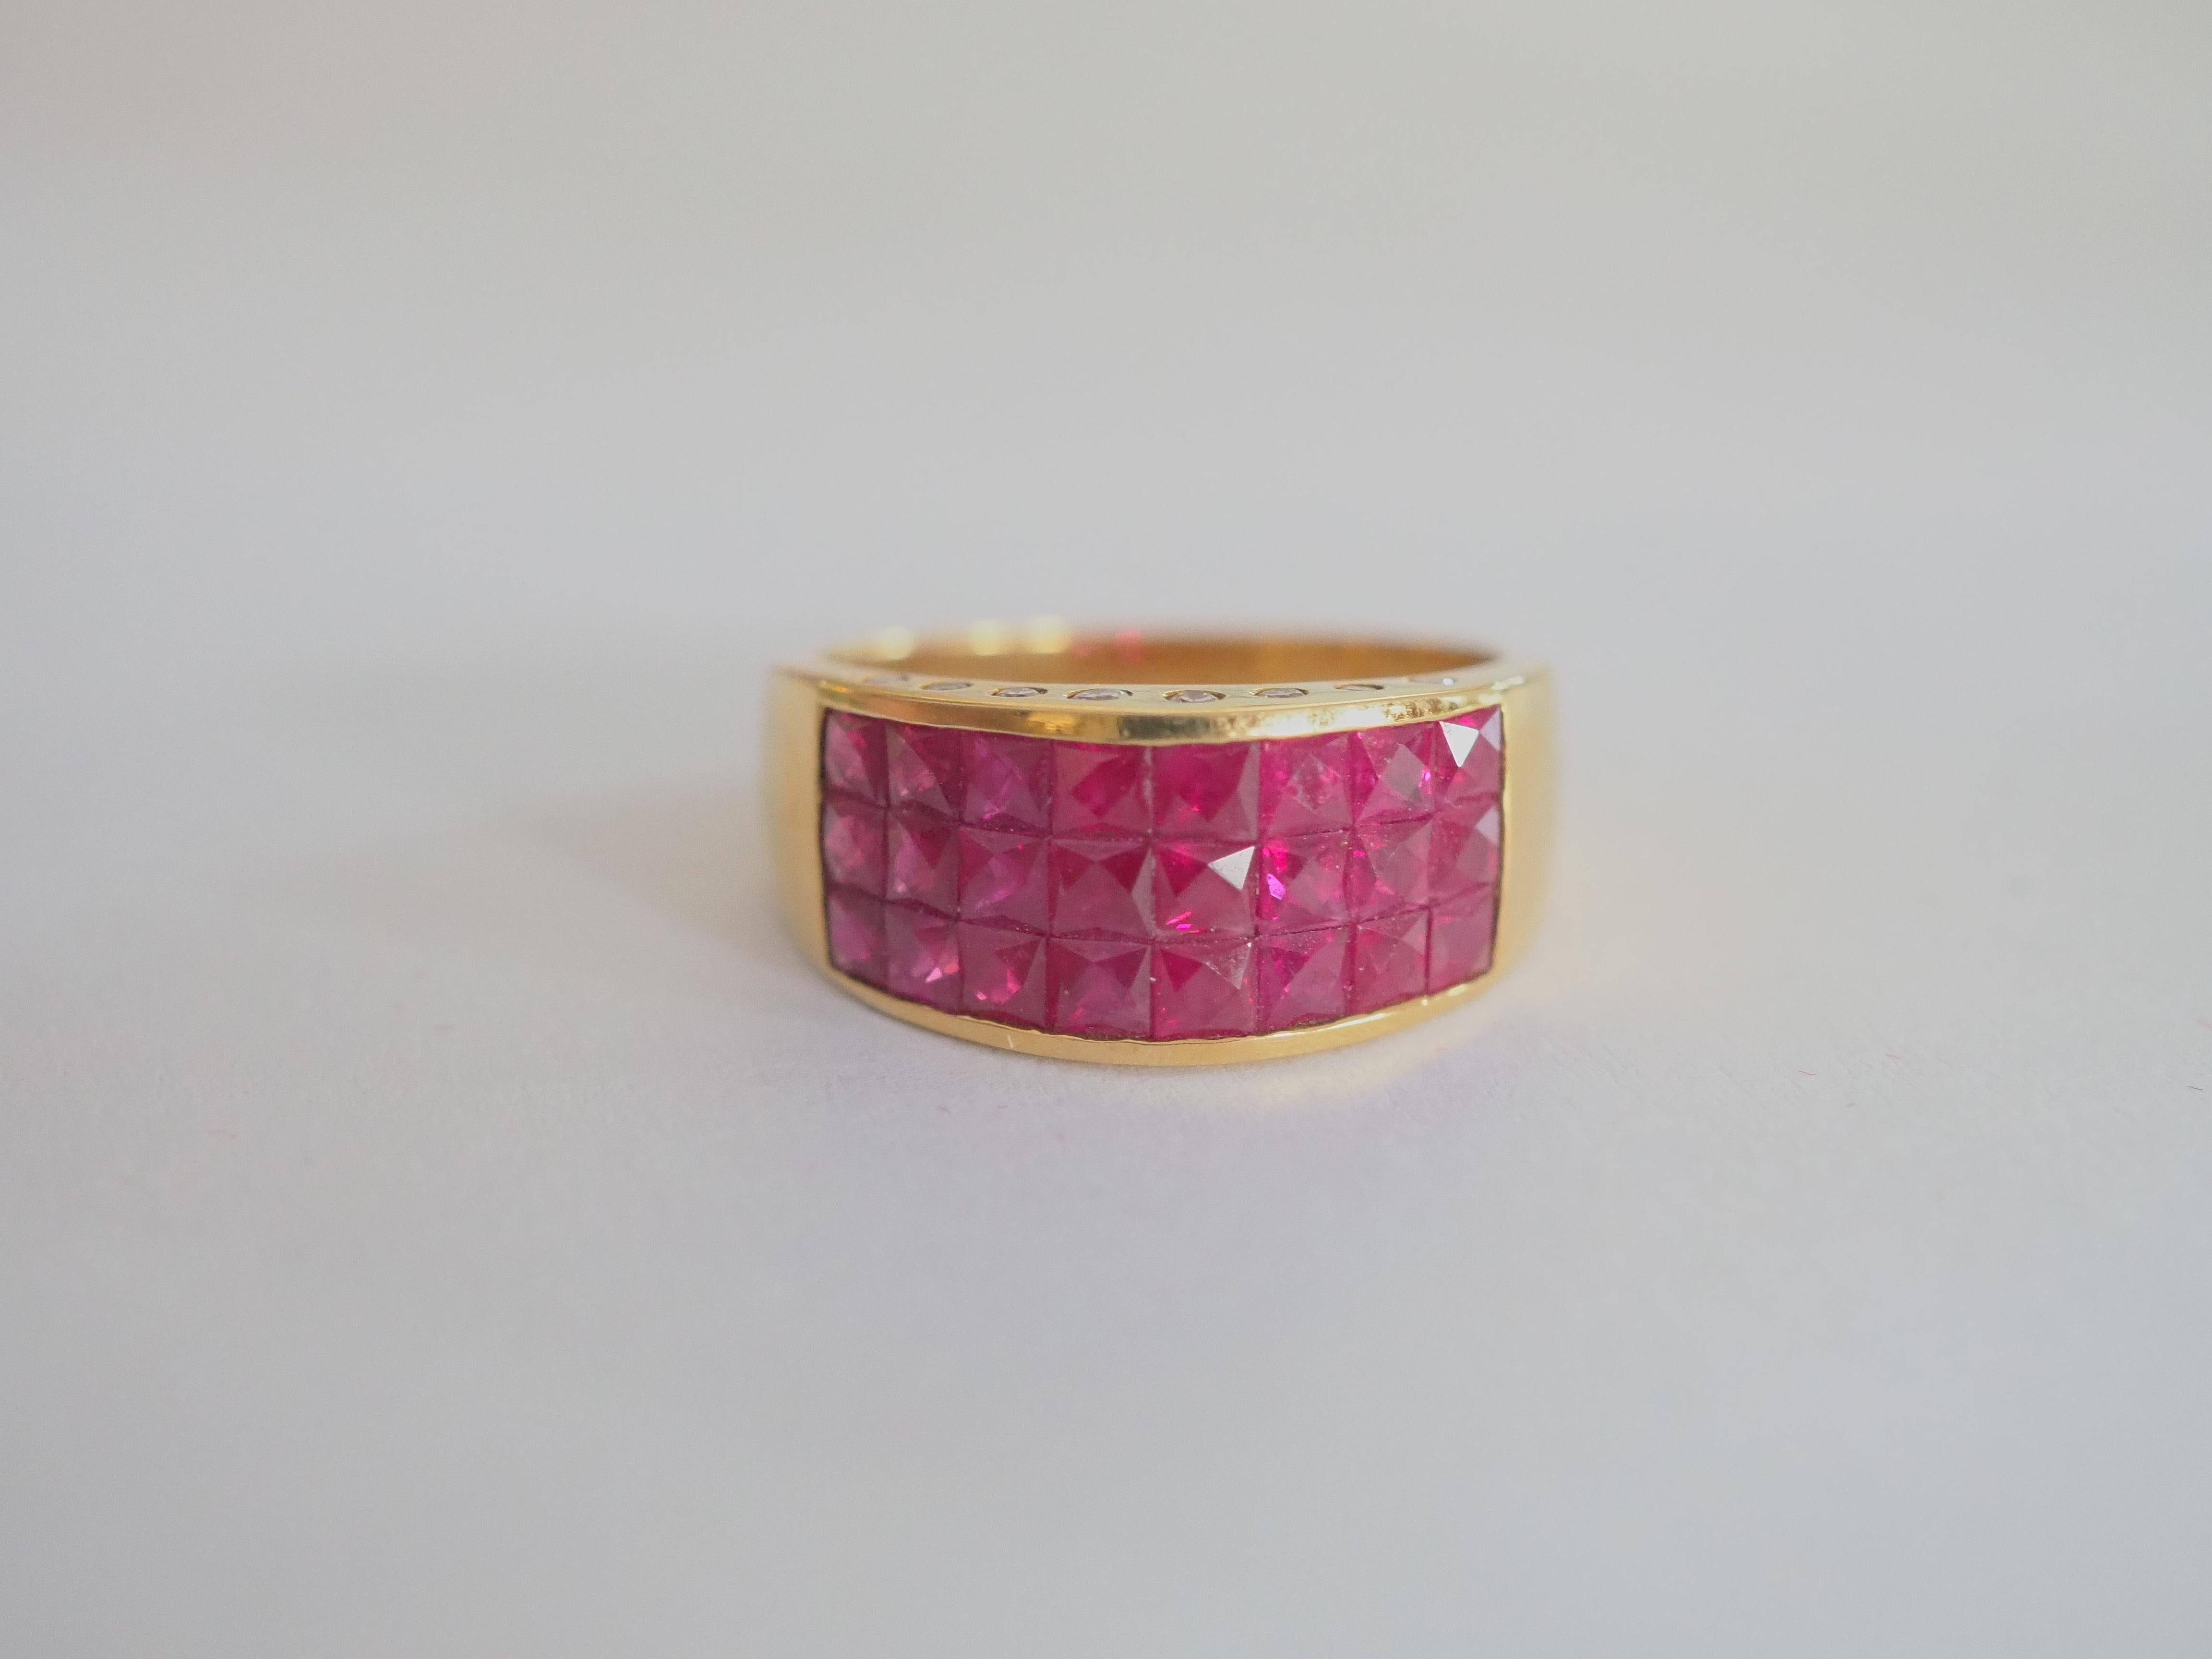 A gorgeous luxury Neo-vintage chunky invincible style band ring that is both suitable for all sexes. This ring has three rows of beautiful Thai rubies and pave round diamonds channeled nicely into the band. The square cut rubies have a beautiful